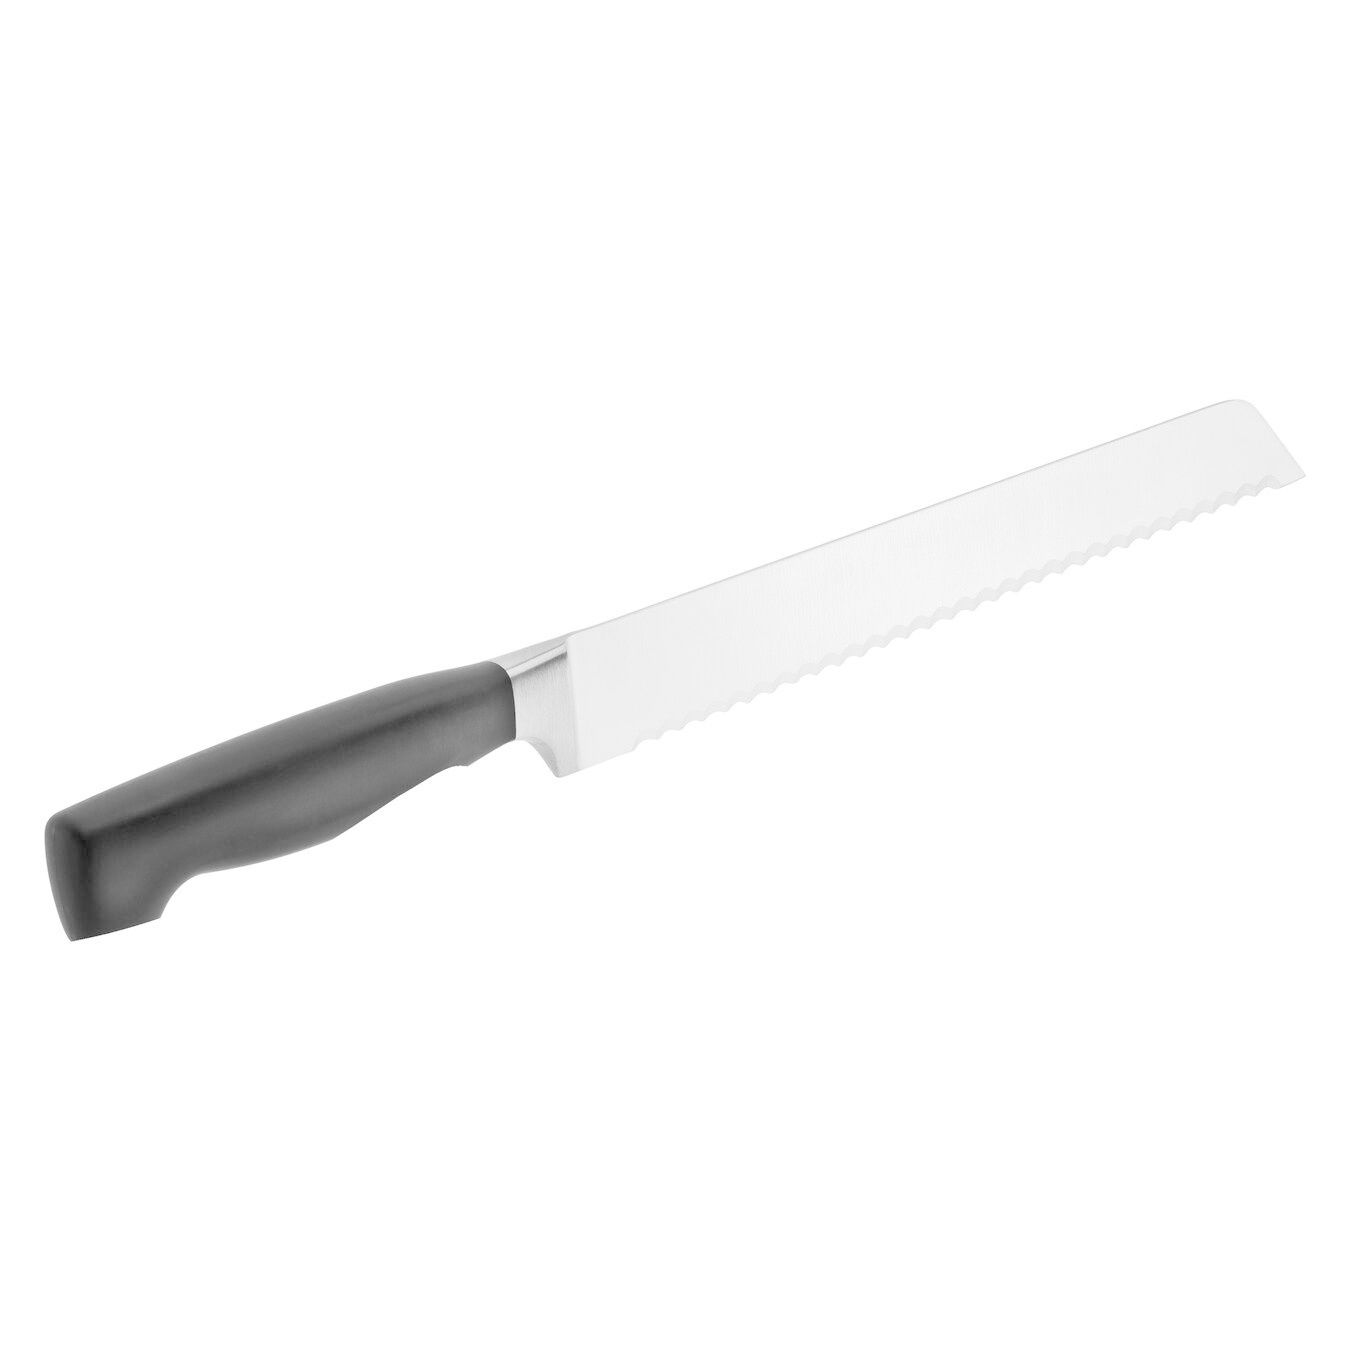 ZWILLING Four Star 8" Bread Knife Scallop Edge